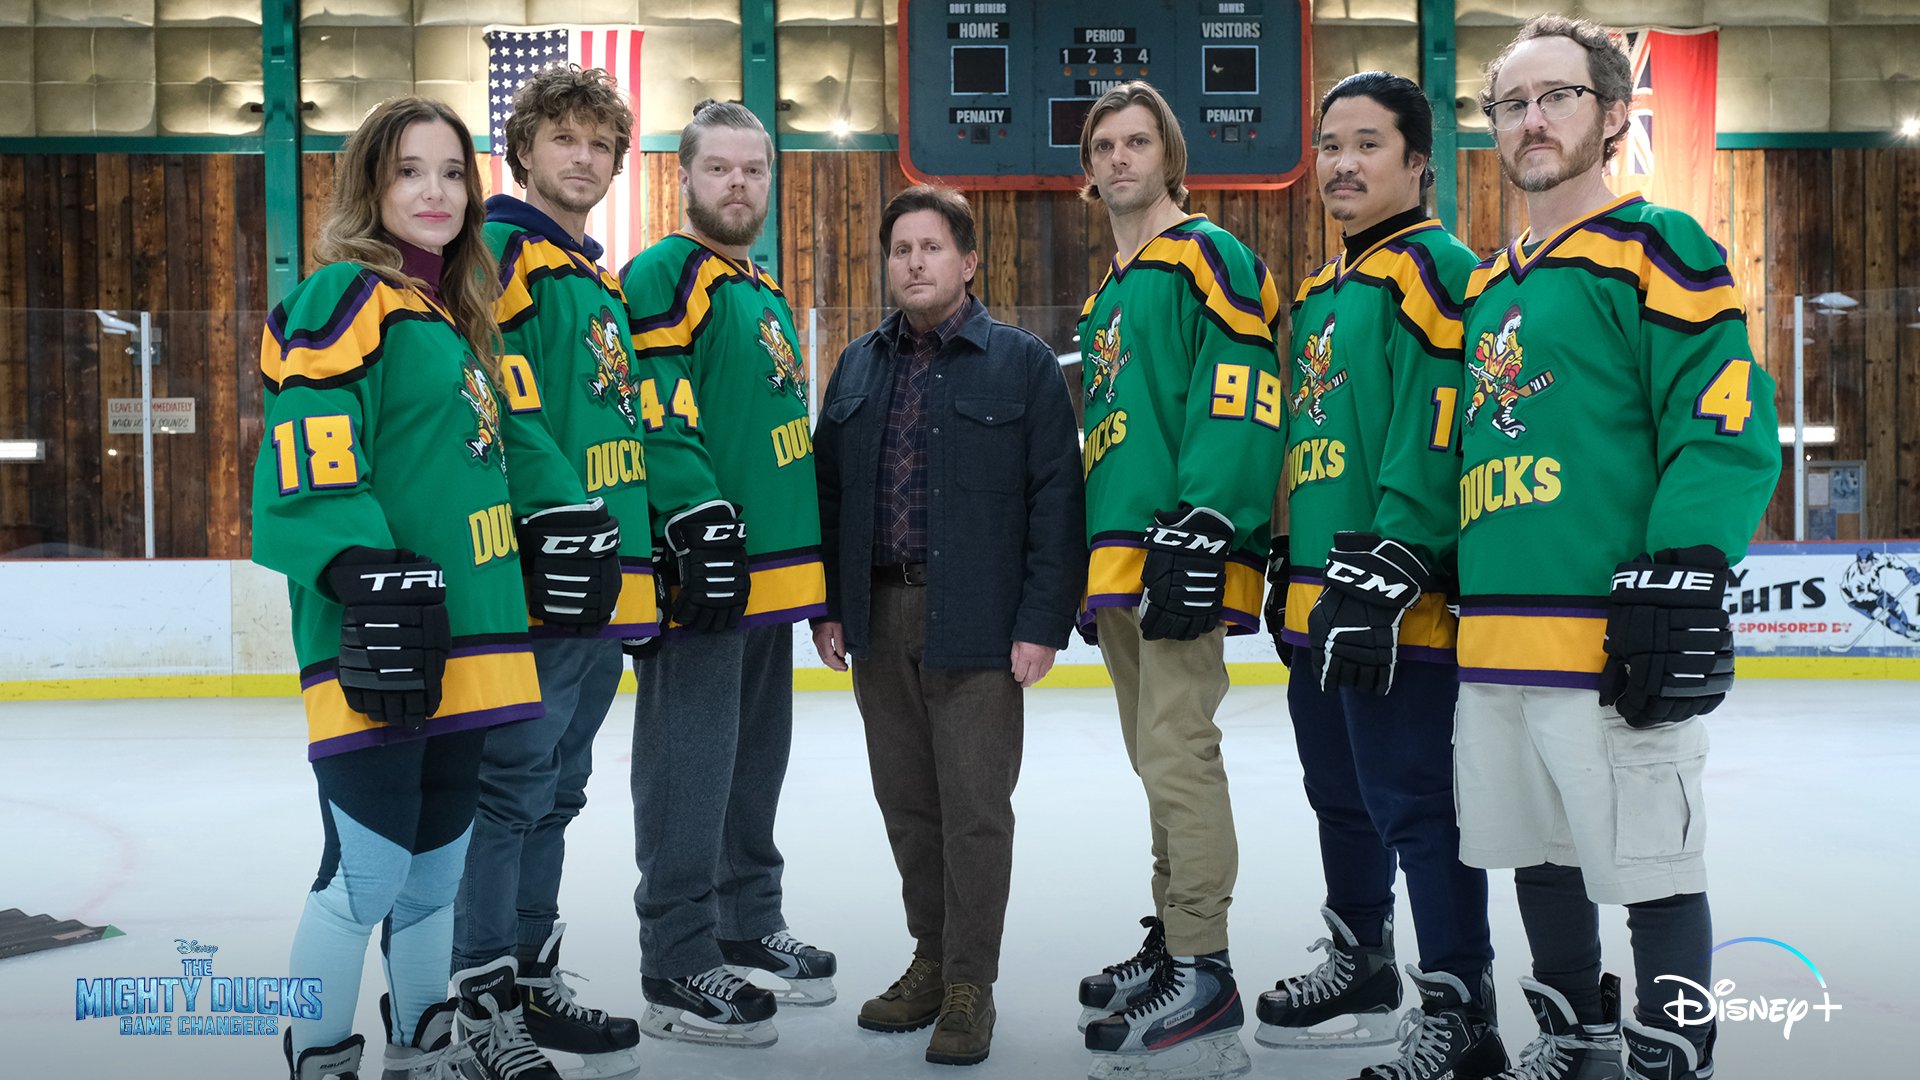 Movie Review: D2 The Mighty Ducks - Puck Junk